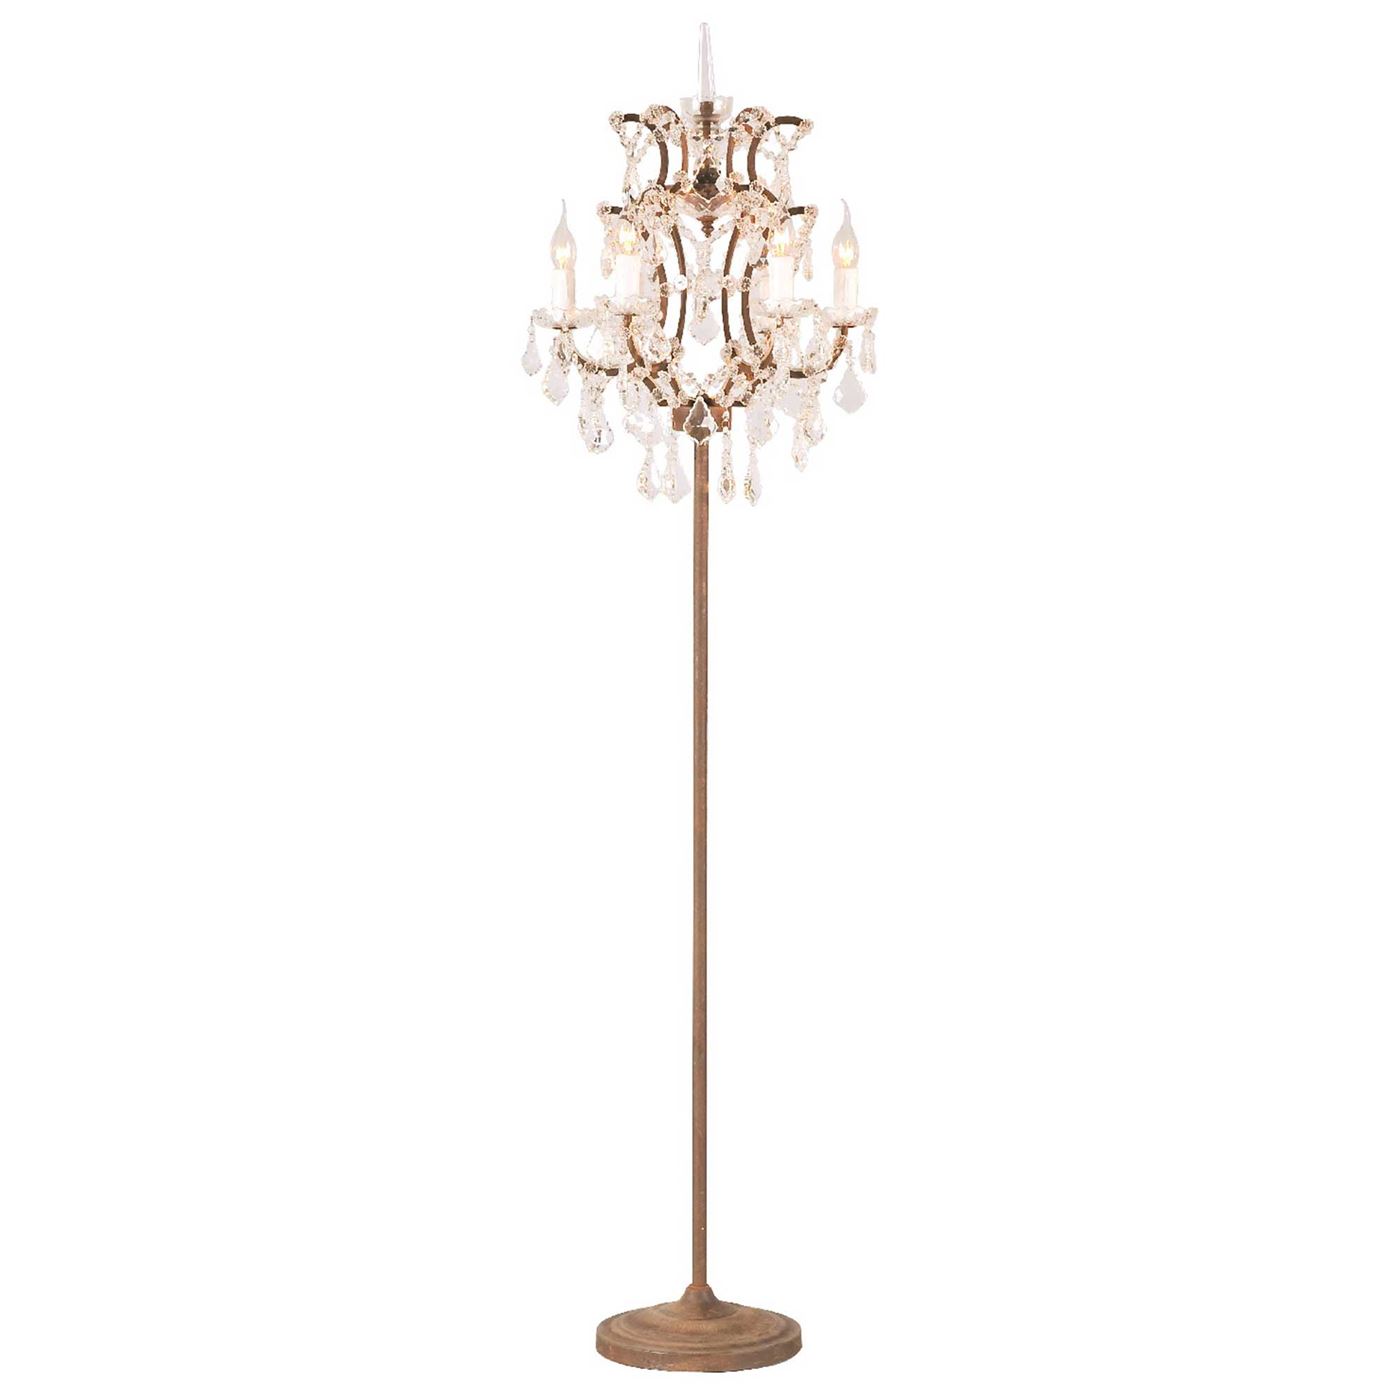 Timothy Oulton Crystal Floor Lamp, Brown | Barker & Stonehouse